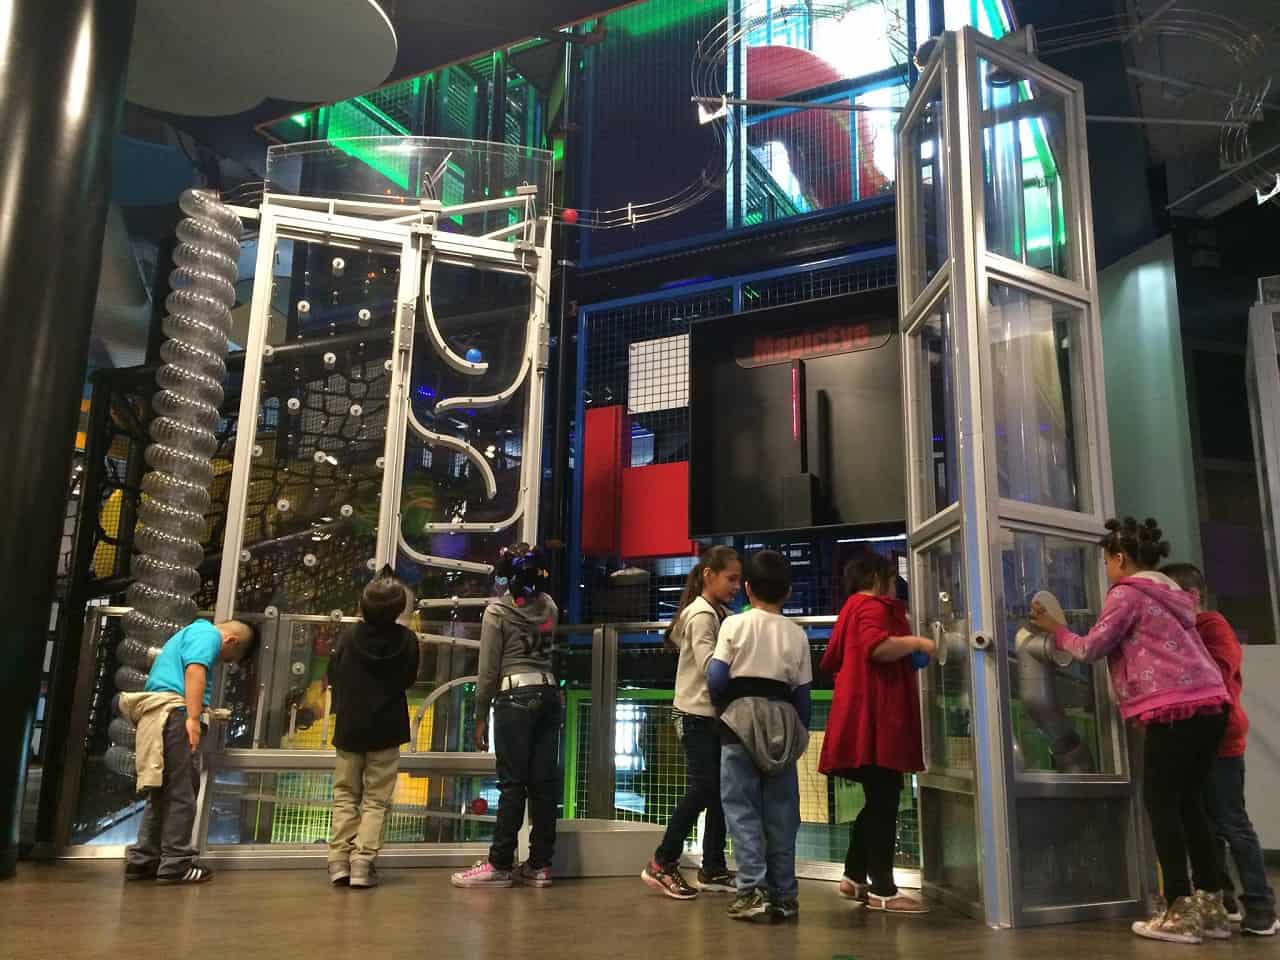 Discovery Children’s Museum